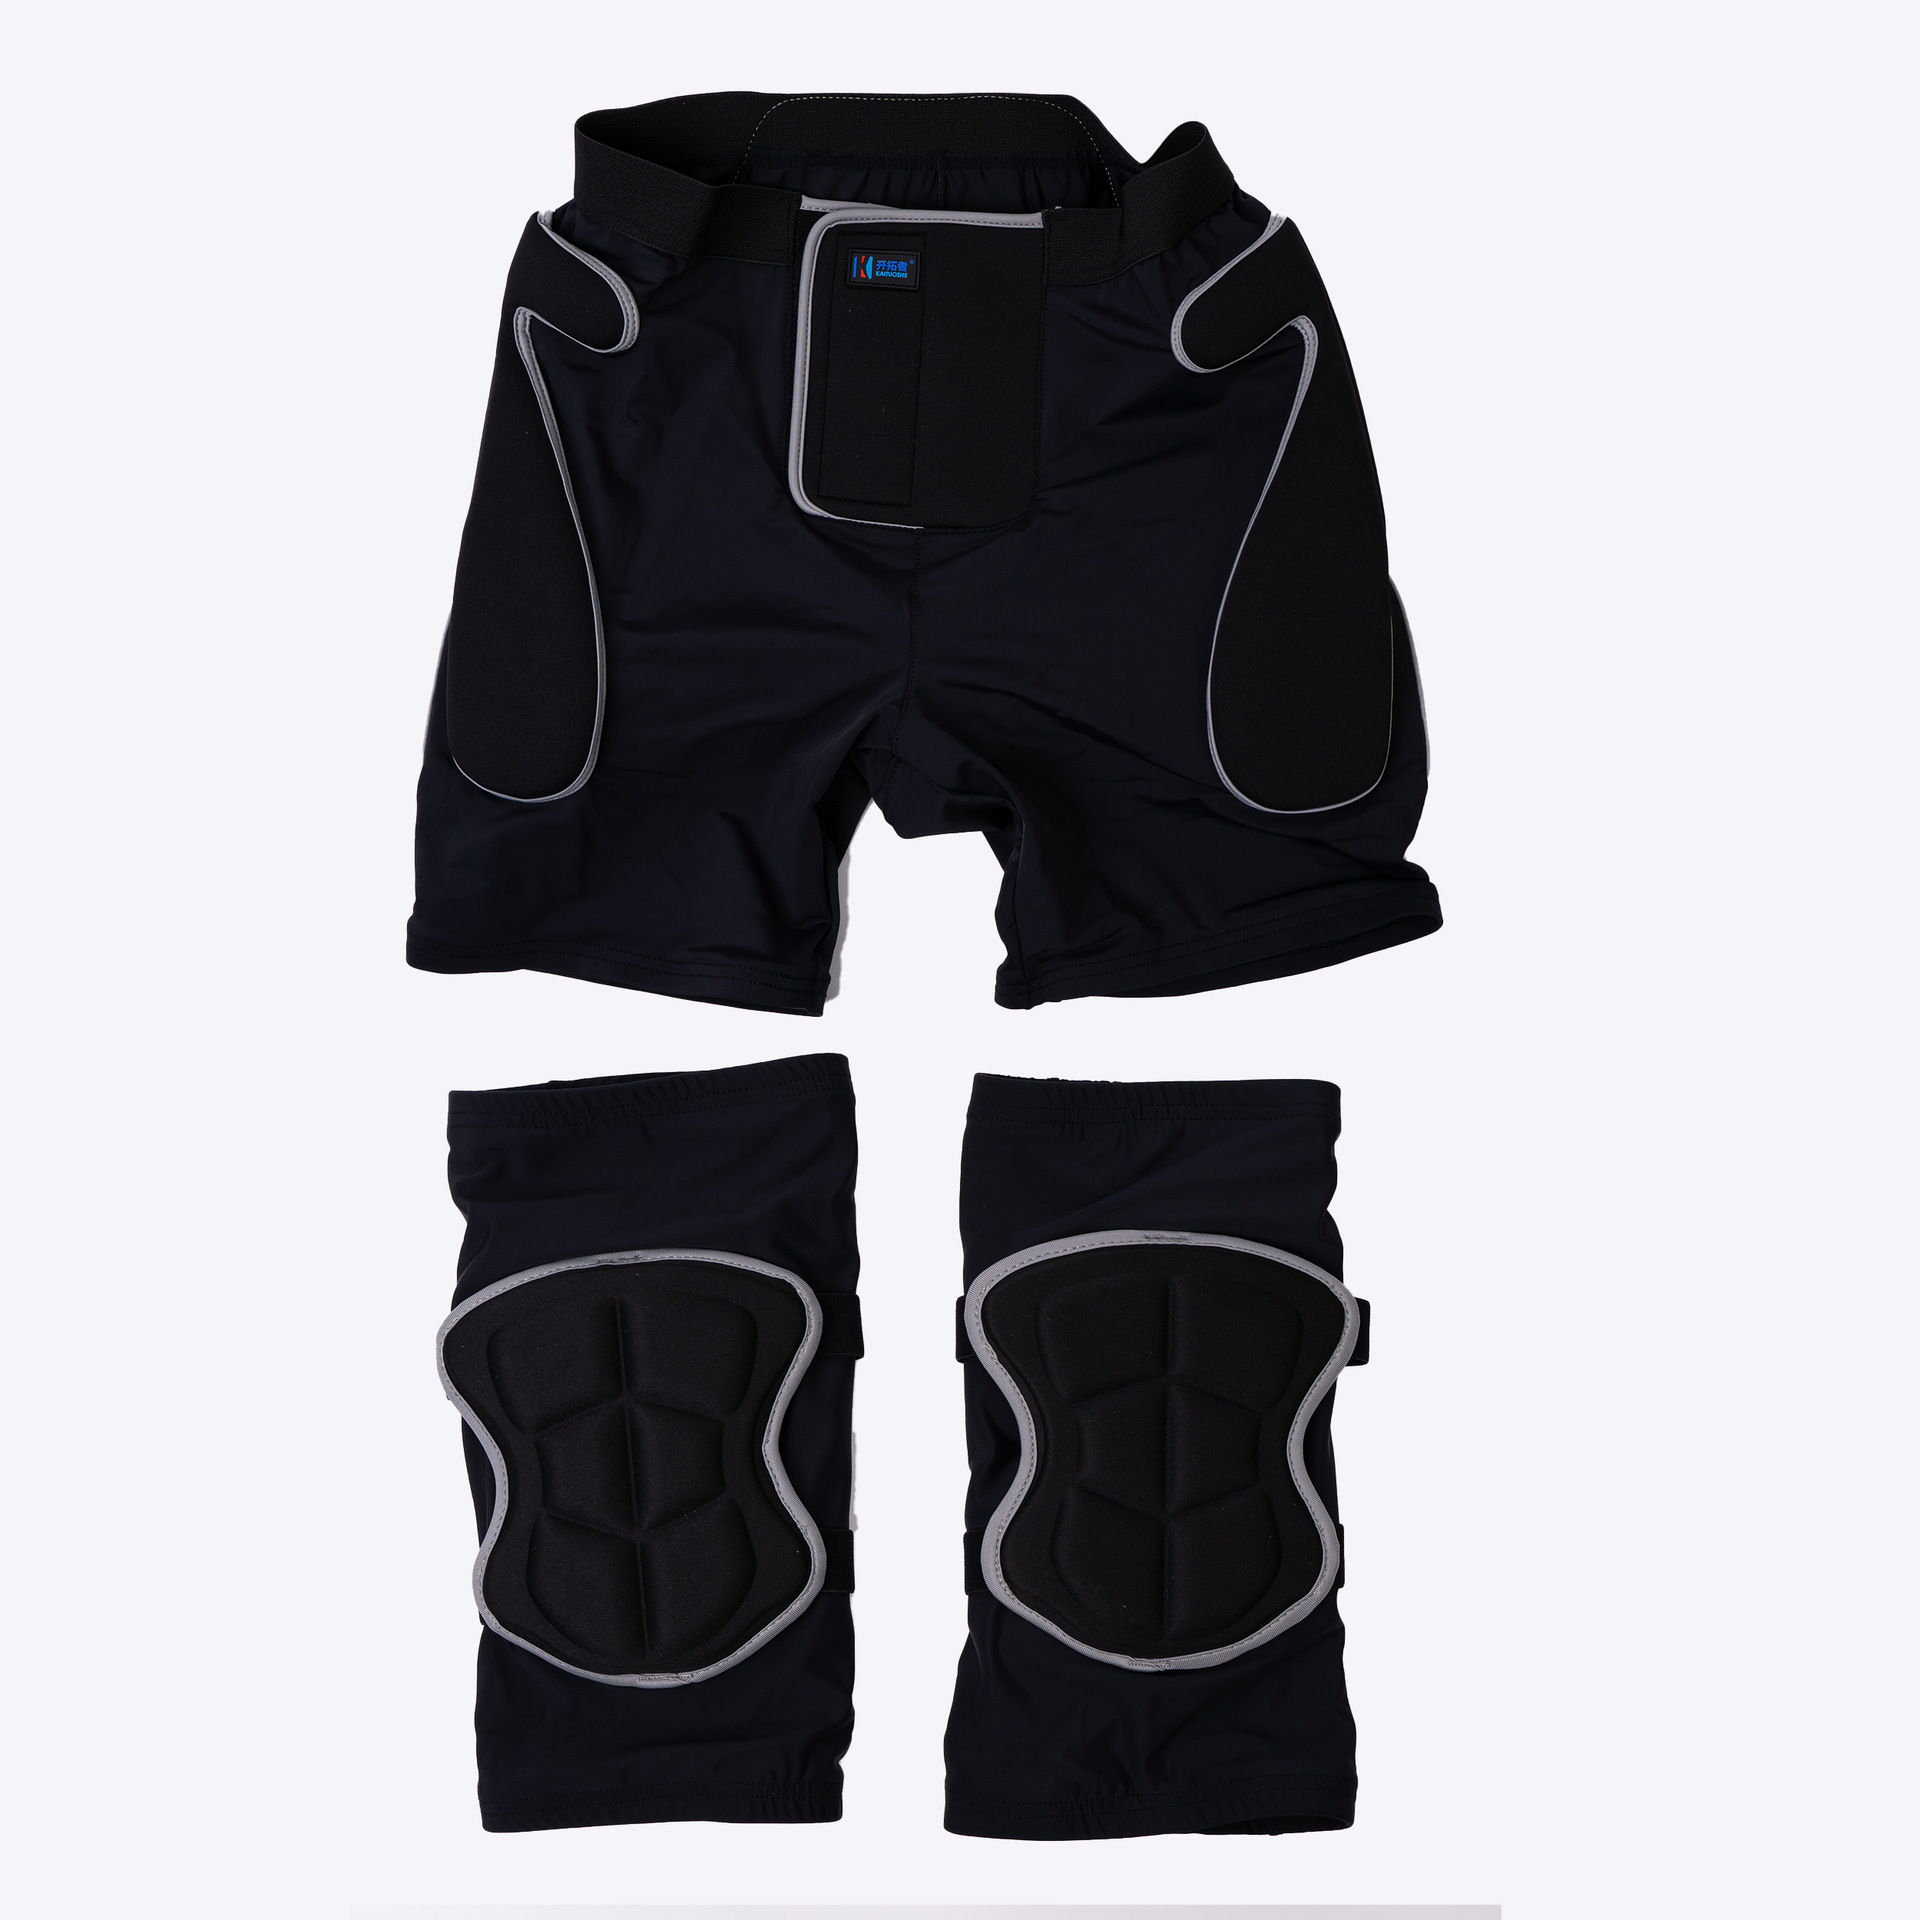 Protective Gear Set for Adult Knee Pads & Short Pants for Skiing Roller Skating